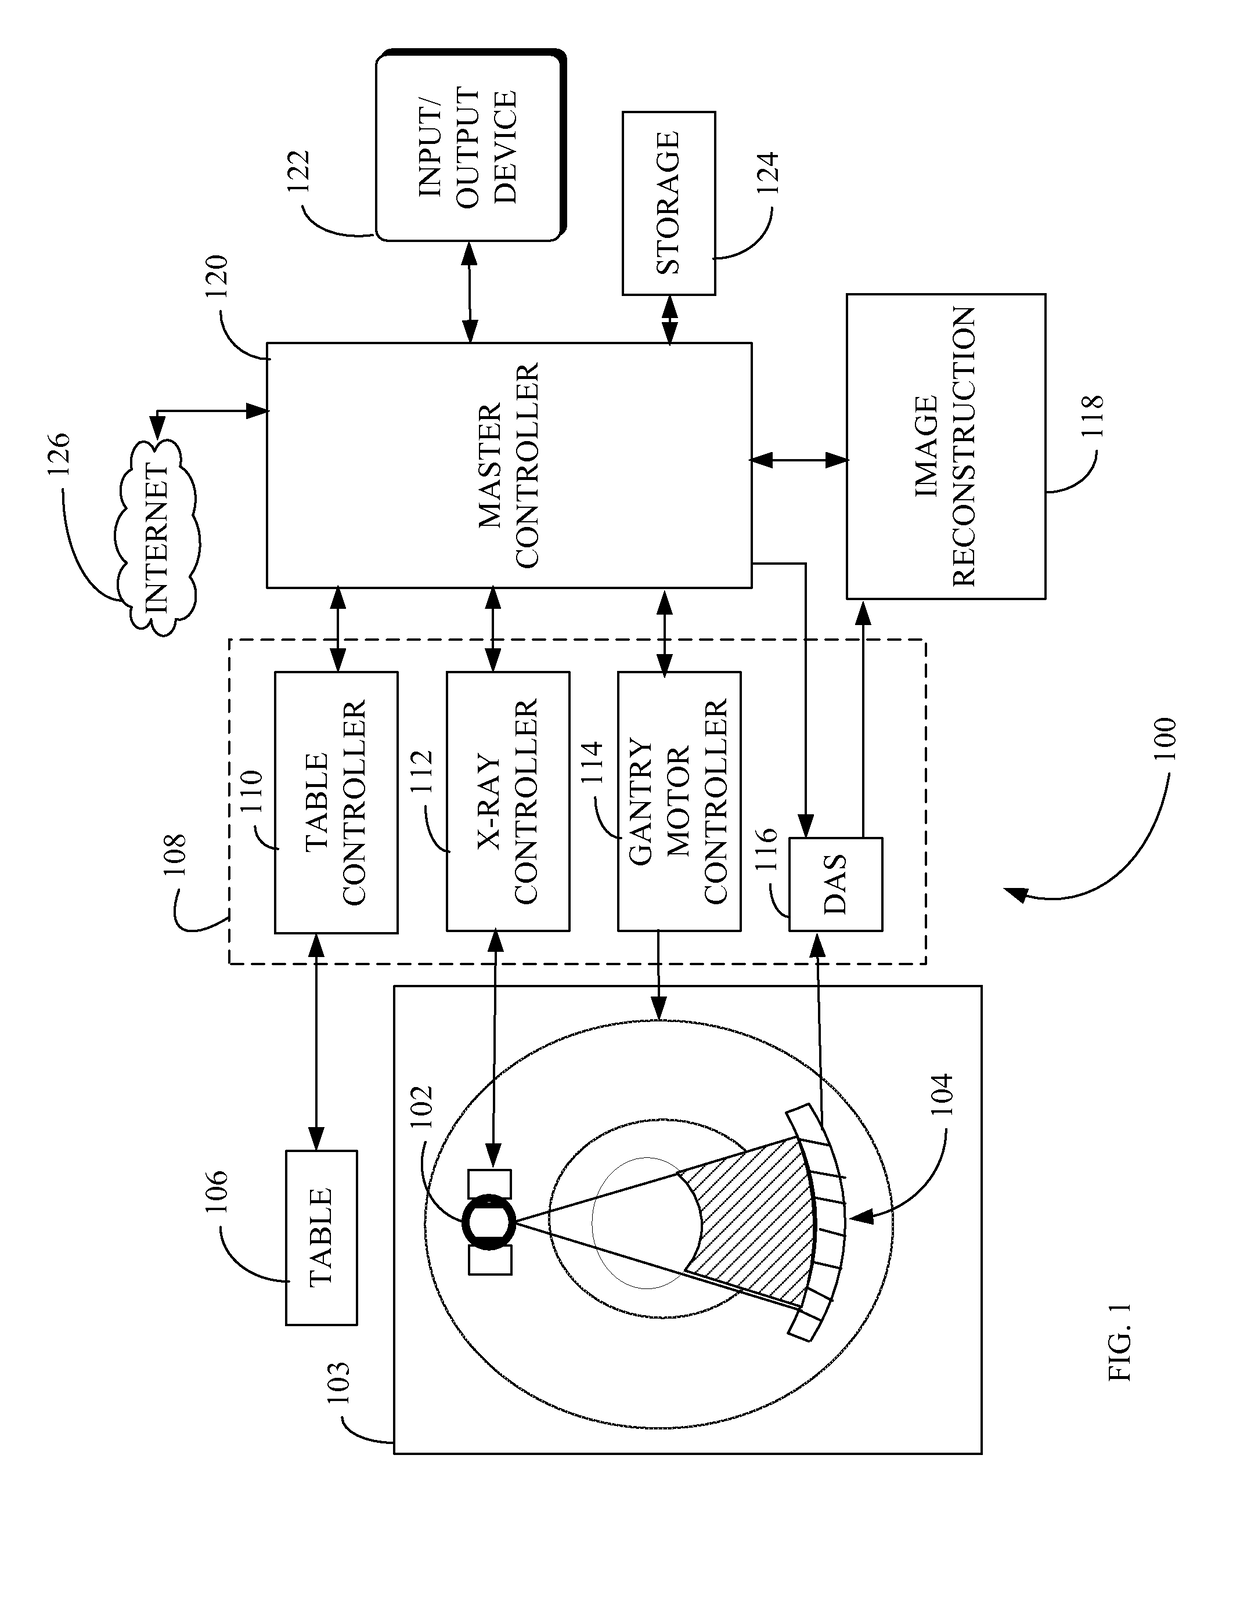 Automatic coronary artery calcium detection and labeling system